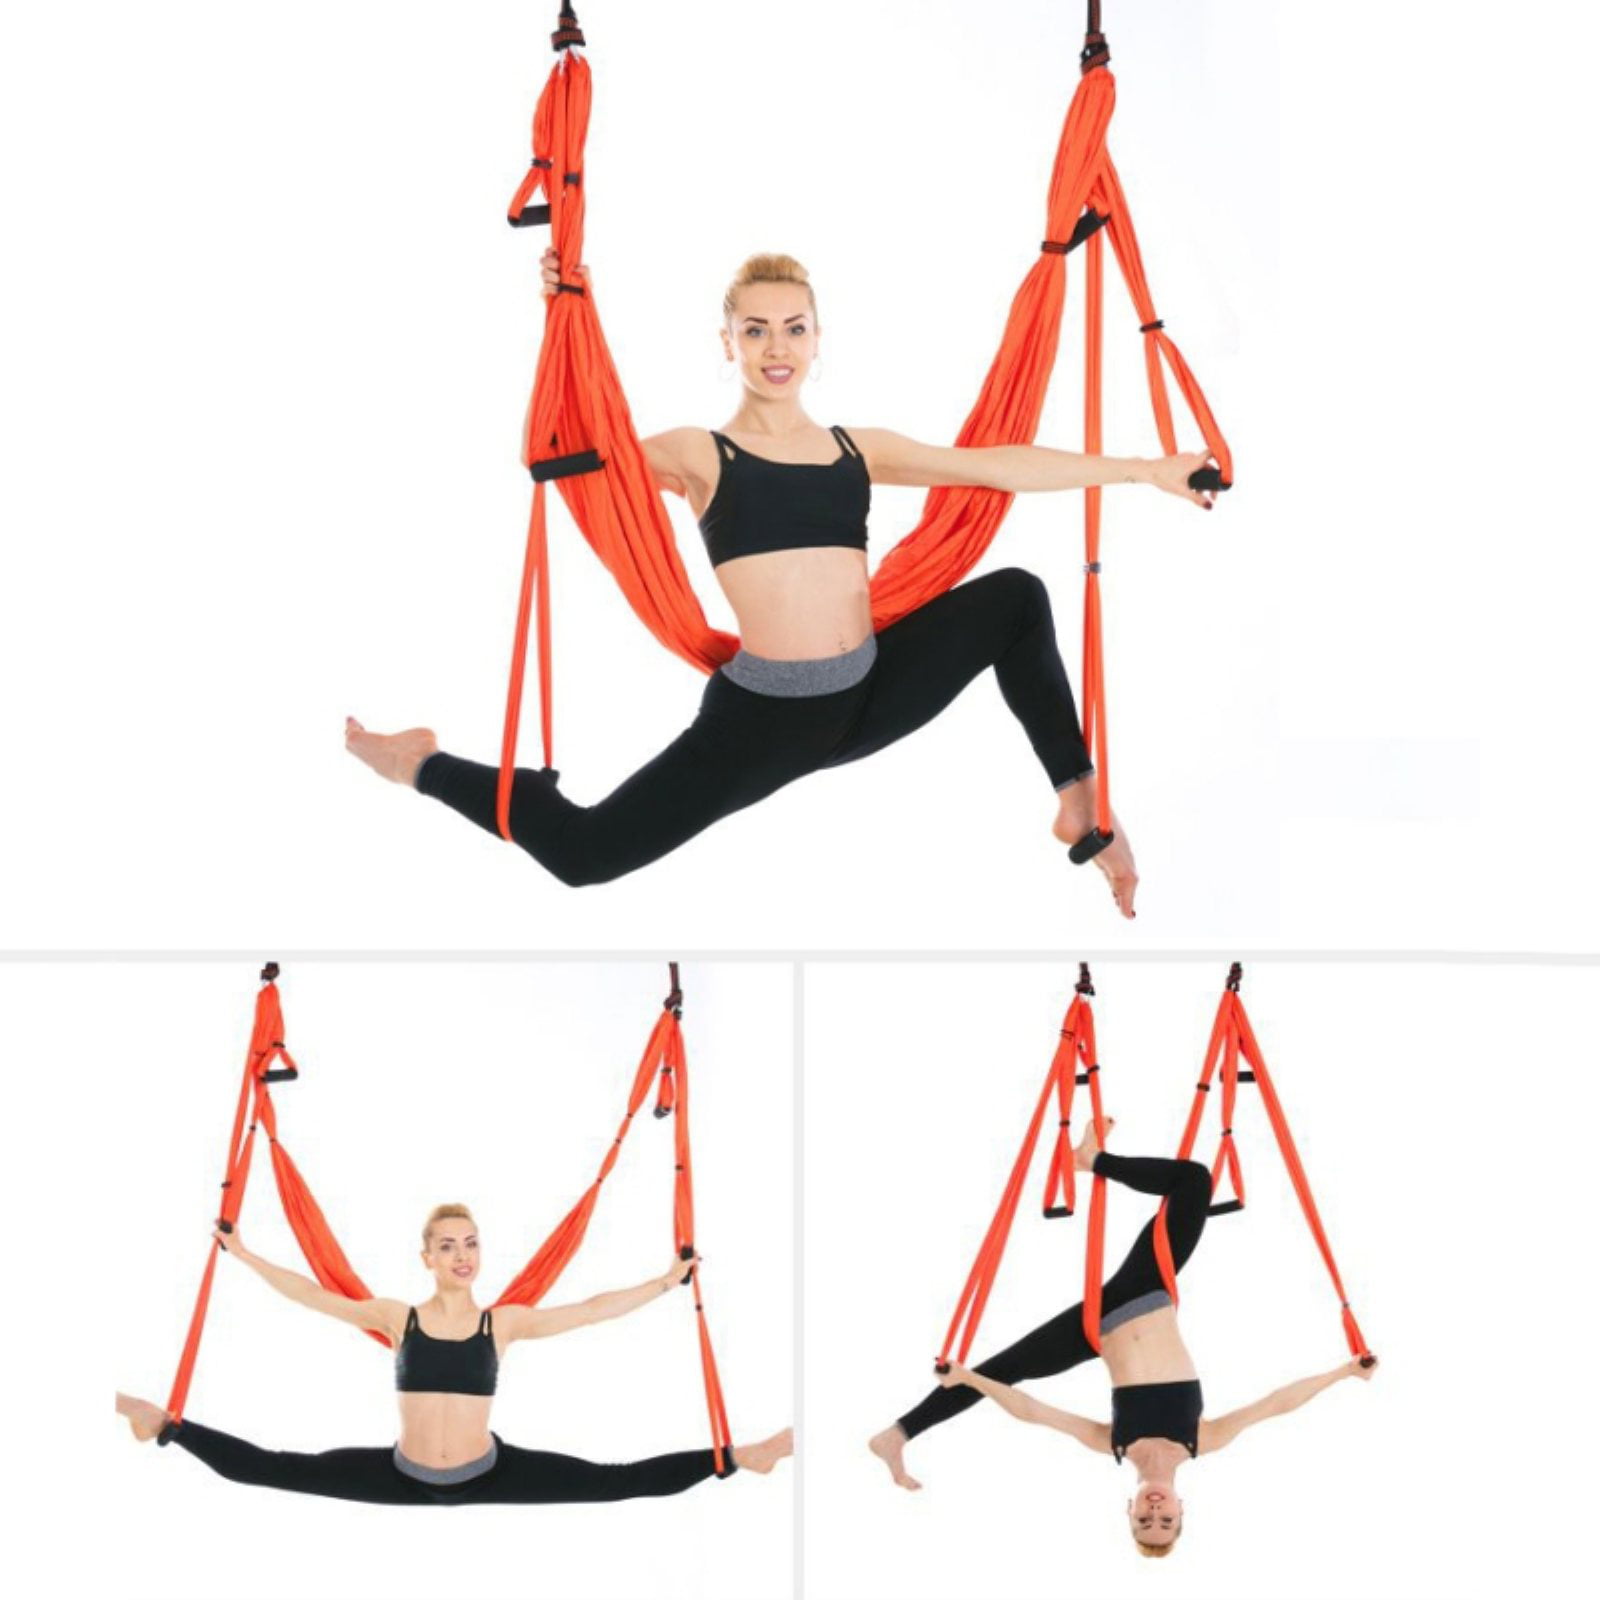 Details about   Aerial Yoga Swing Hammock Anti-Gravity Fitness Inversion Yoga Swing Sling Prop 